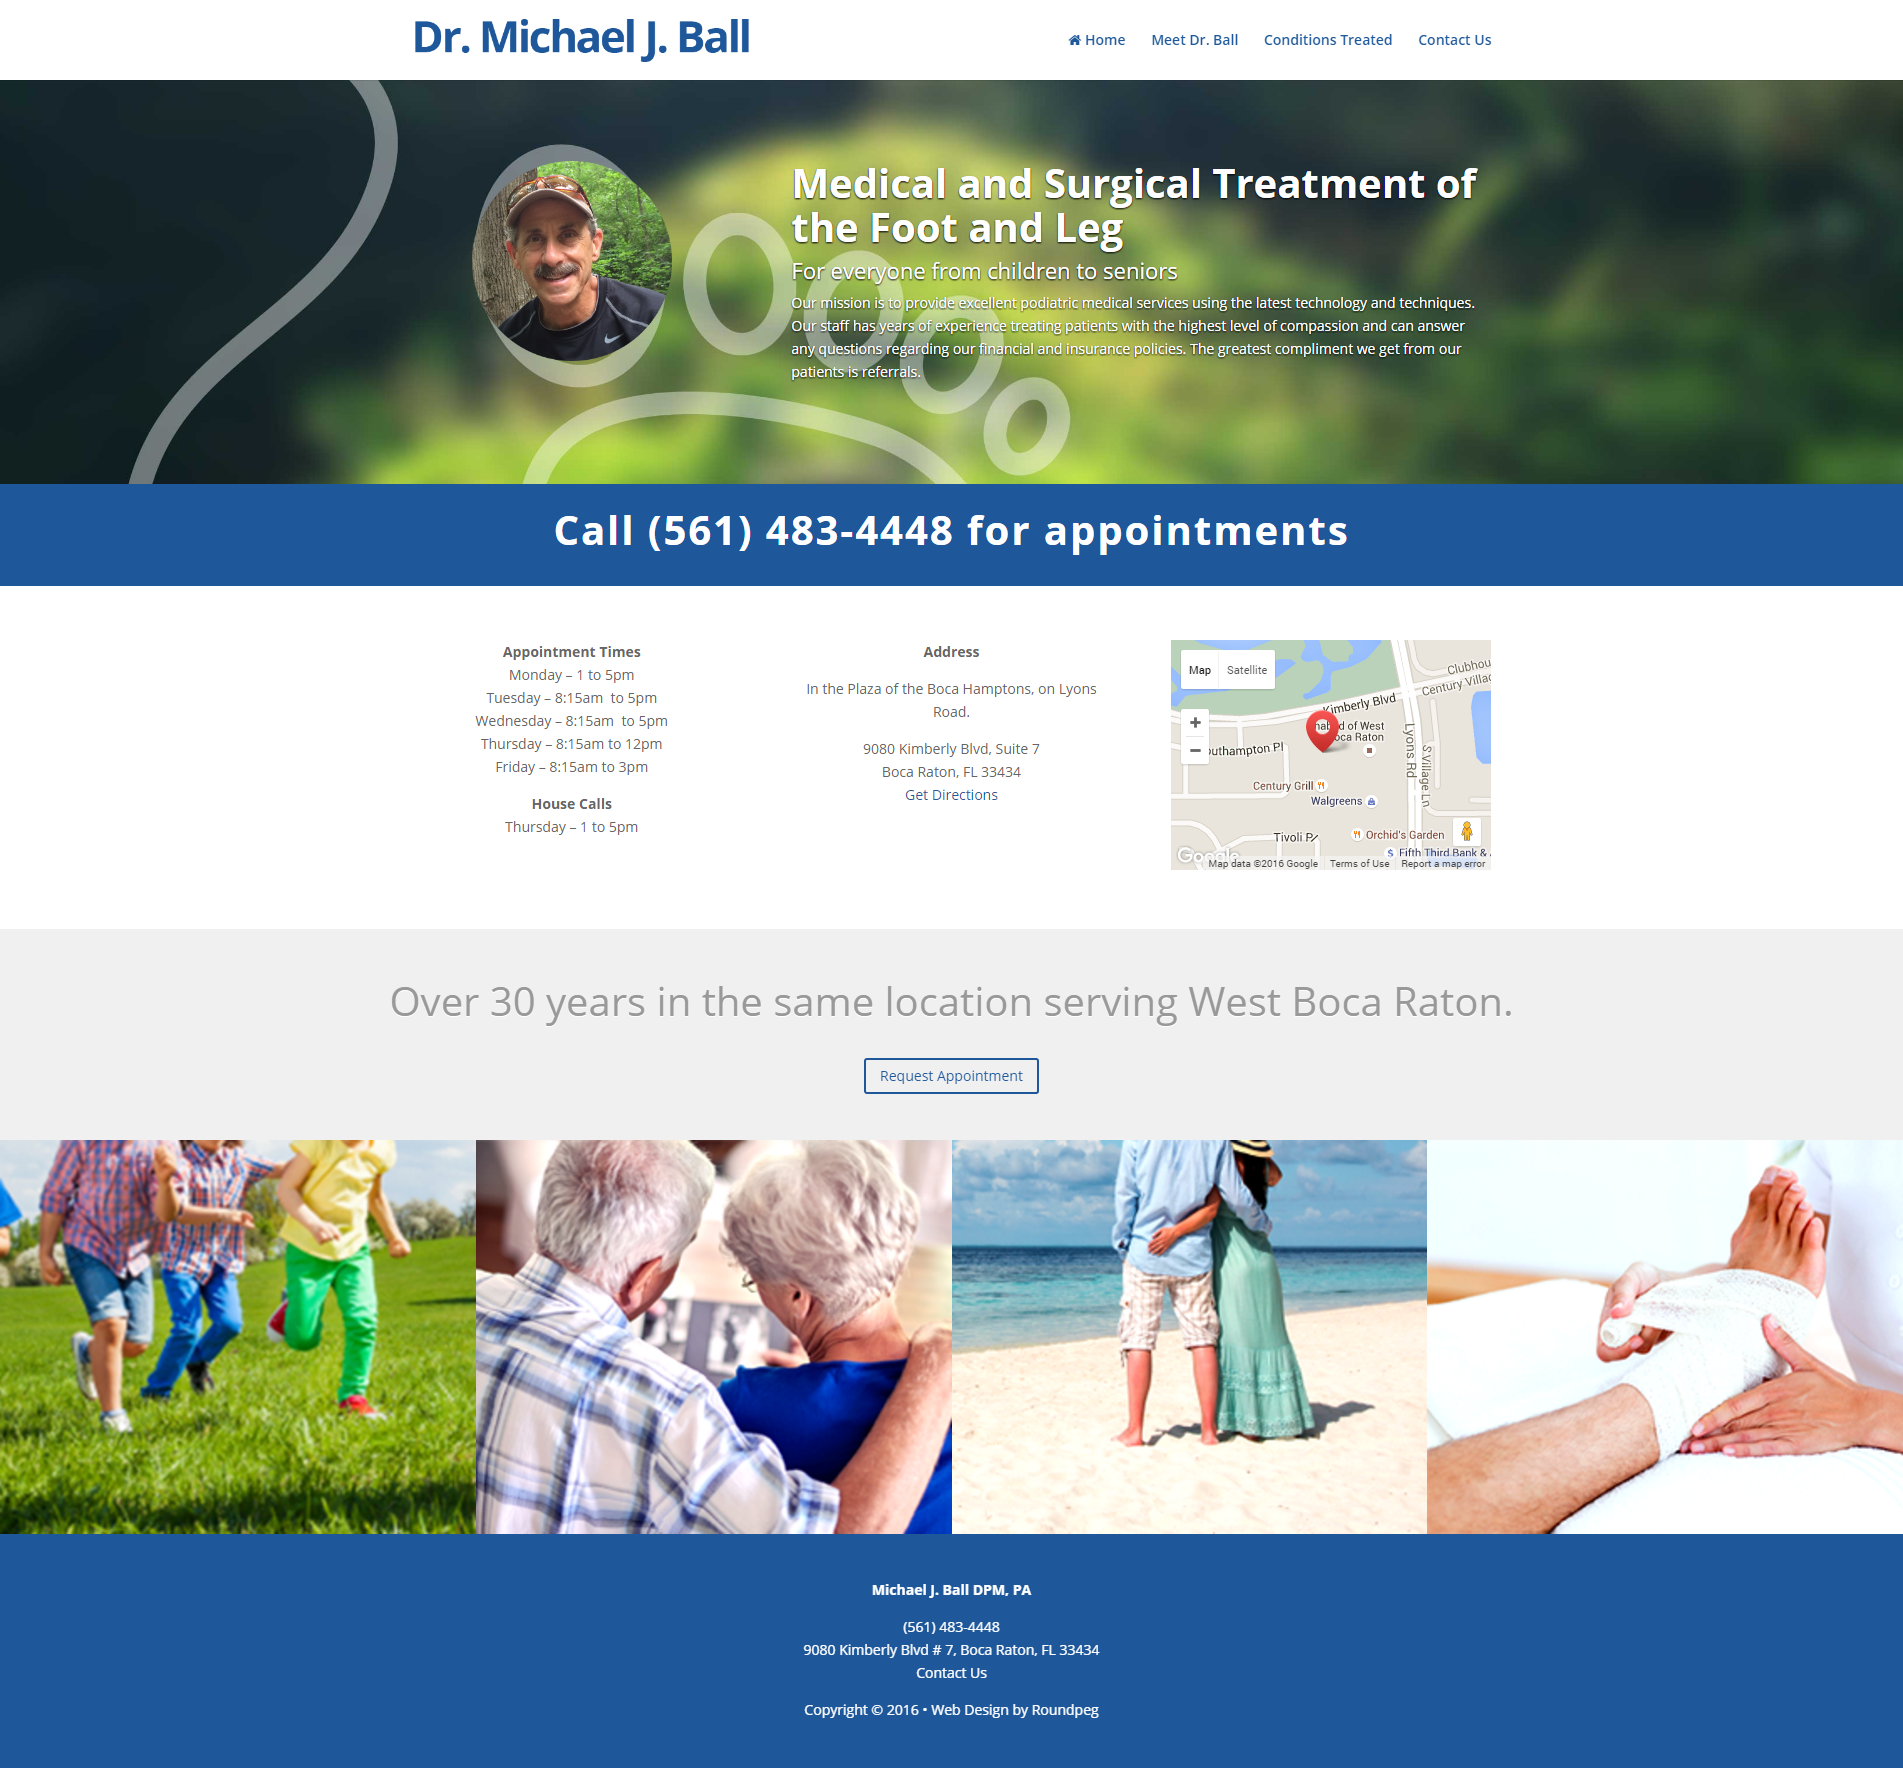 Dr. Michael Ball Surgical Treatment of the Foot and Leg